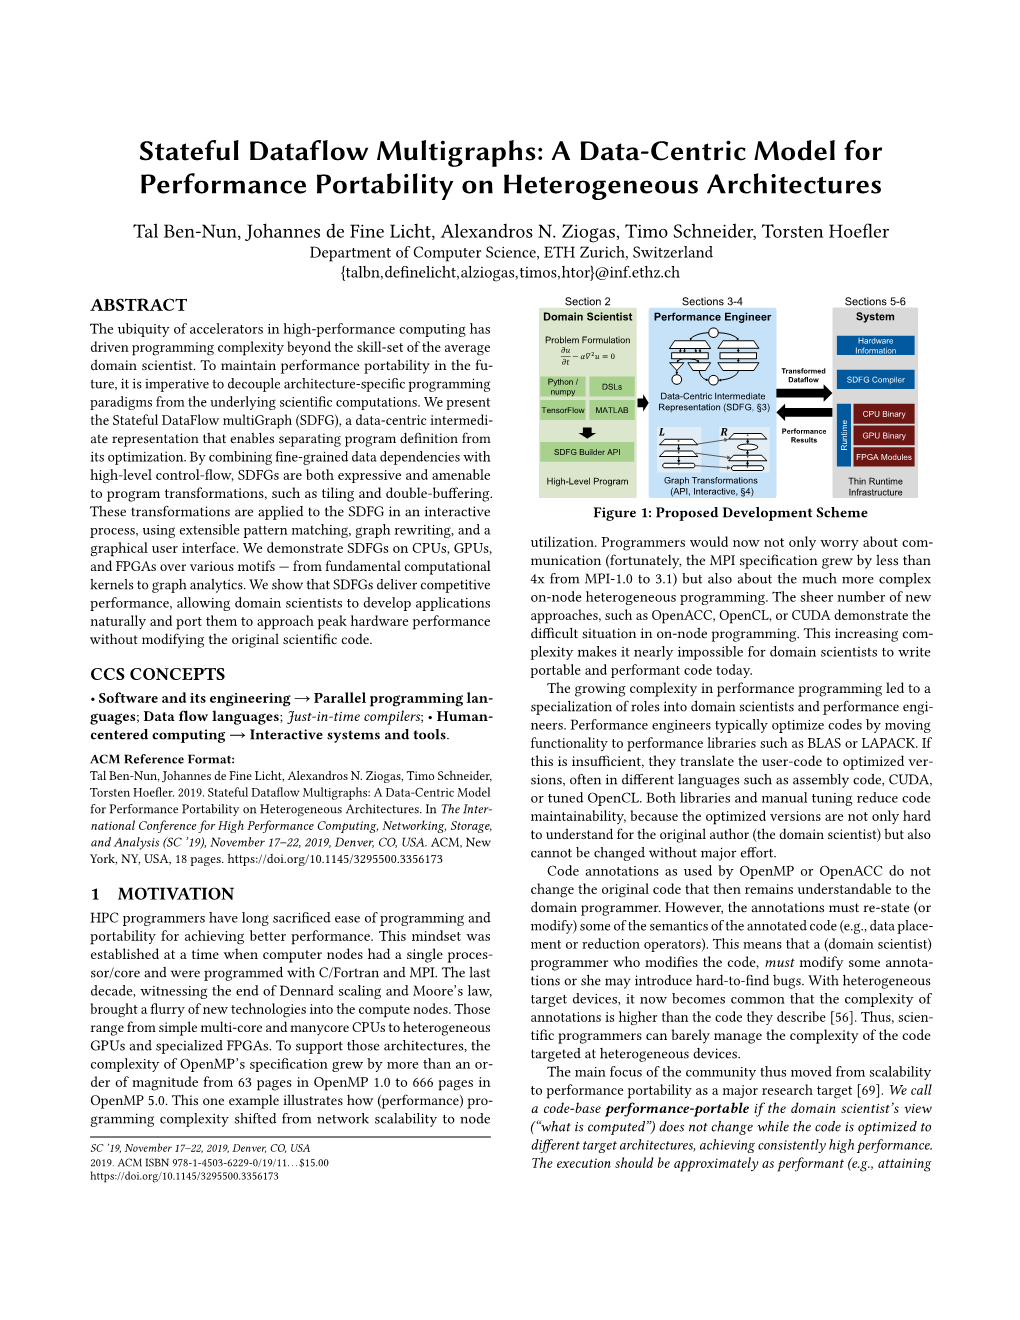 Stateful Dataflow Multigraphs: a Data-Centric Model for Performance Portability on Heterogeneous Architectures